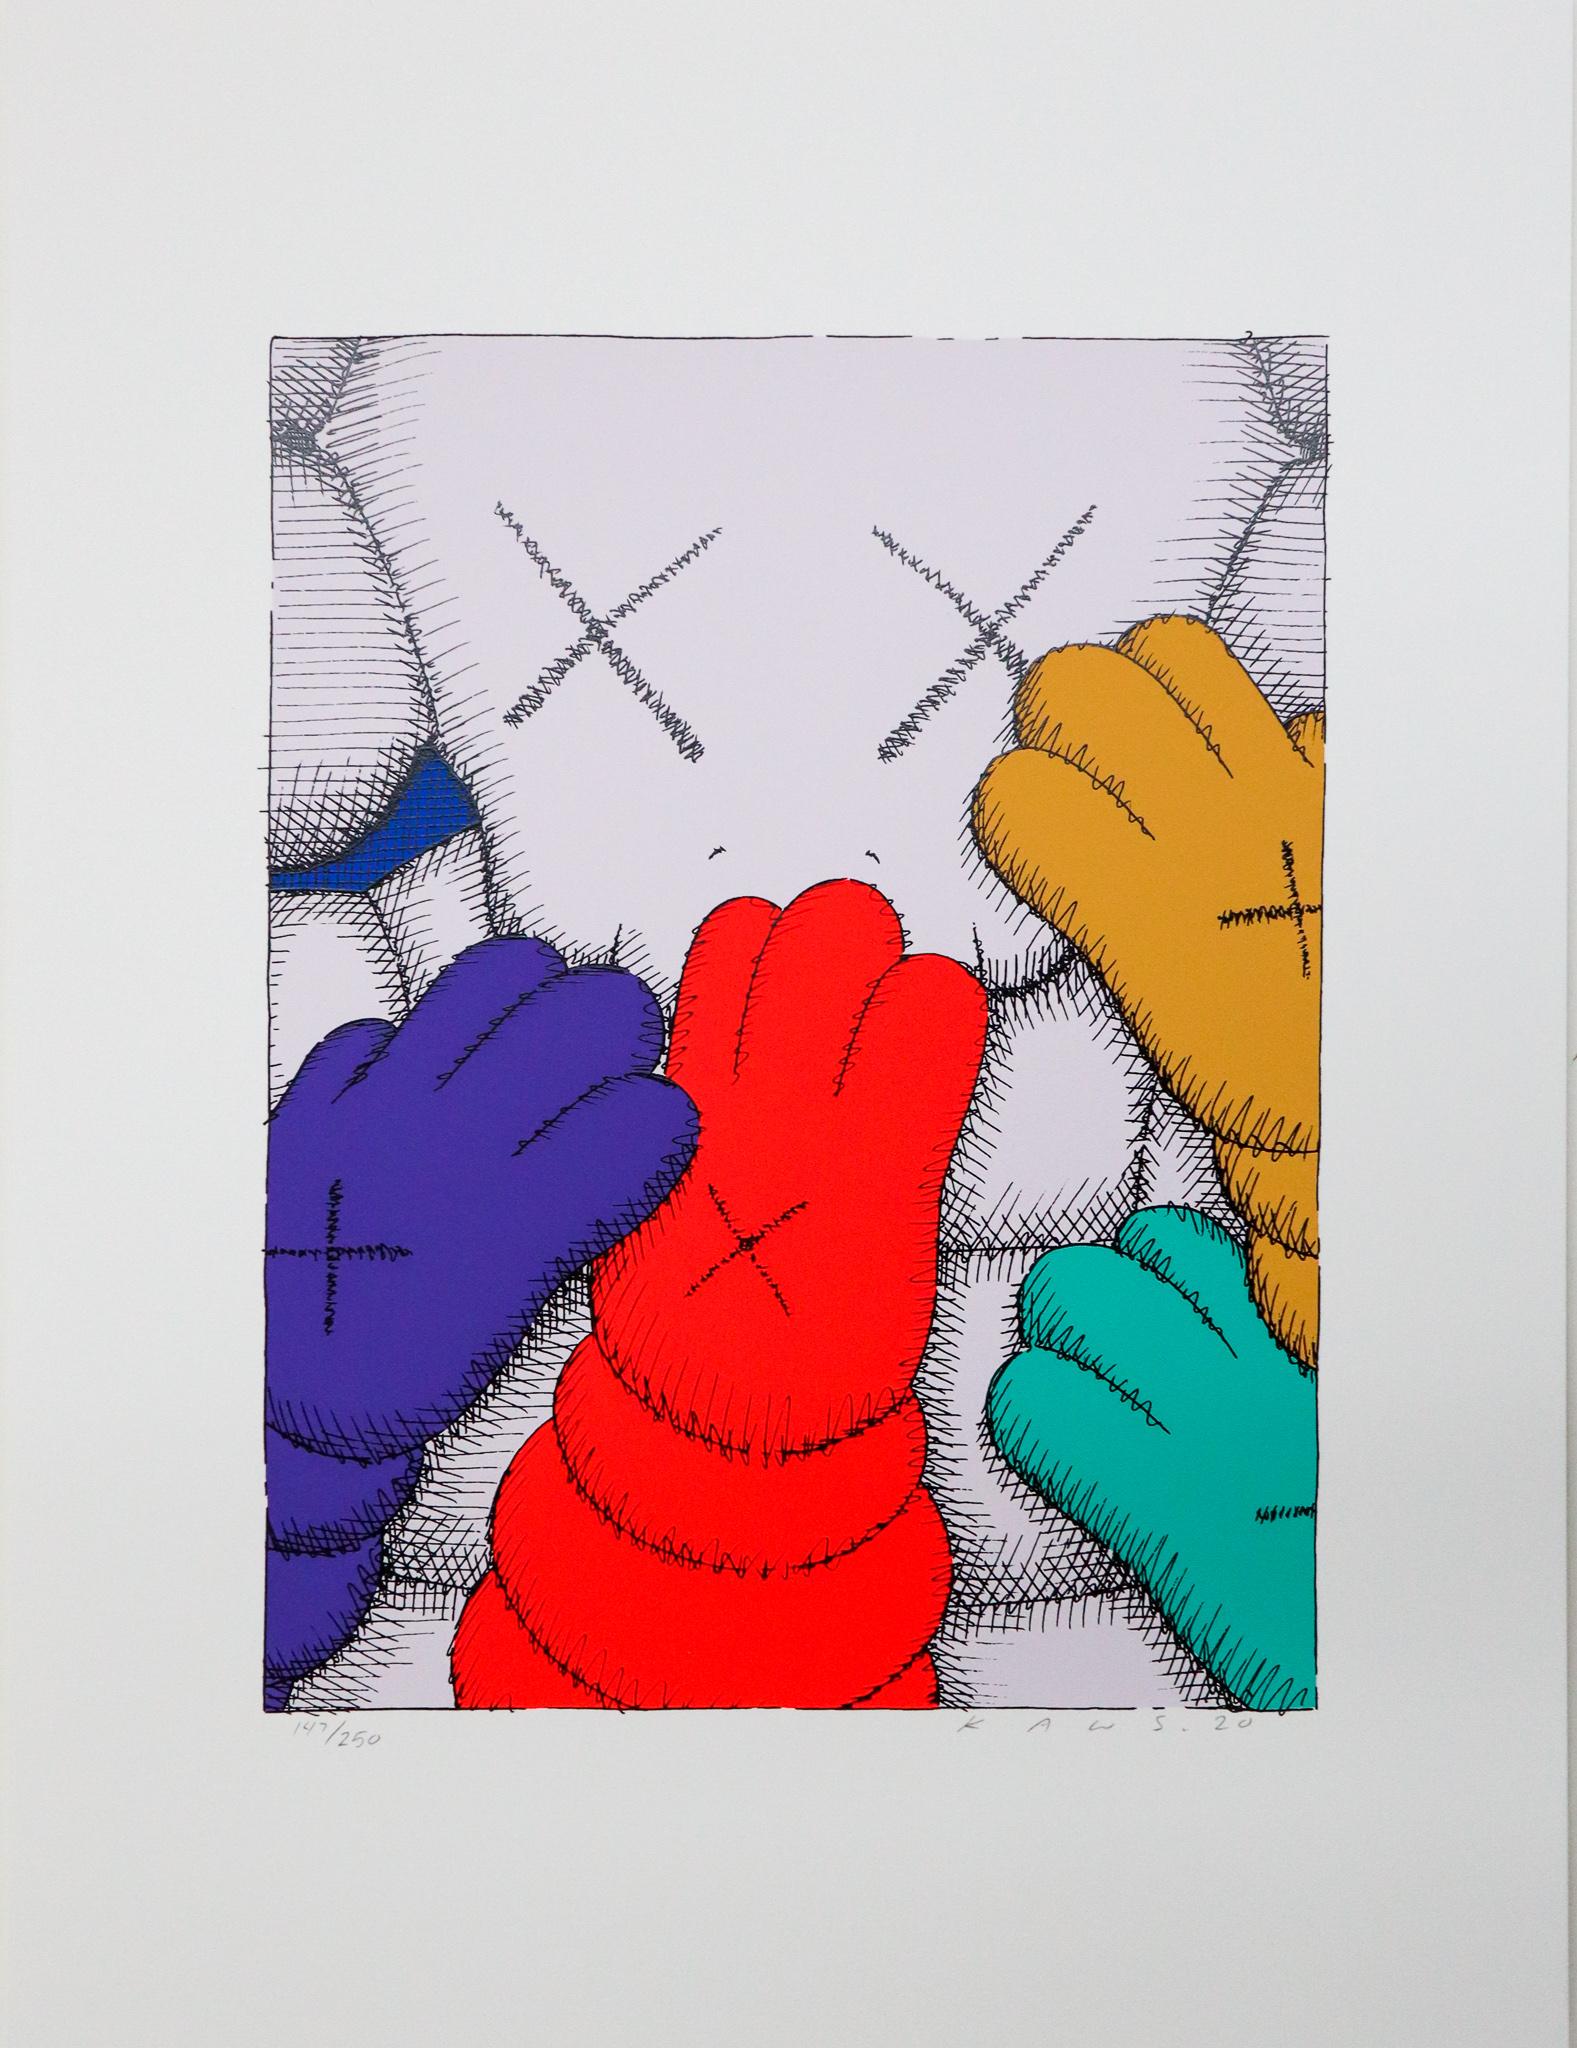 KAWS
Untitled from Urge
From the rare limited edition of 250
Original Screen print on paper
Hand signed and numbered
MINT Condition
